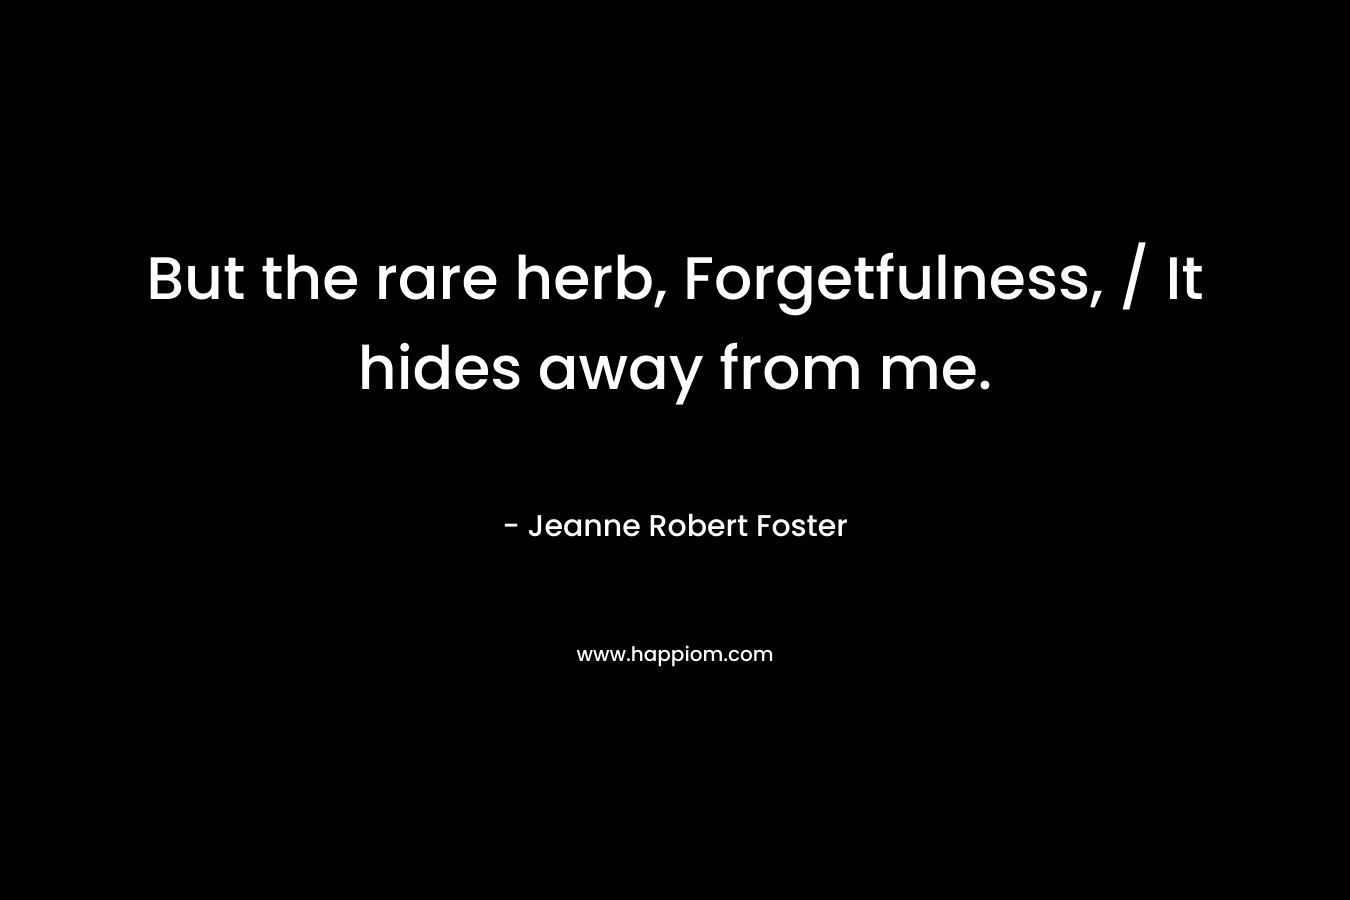 But the rare herb, Forgetfulness, / It hides away from me.